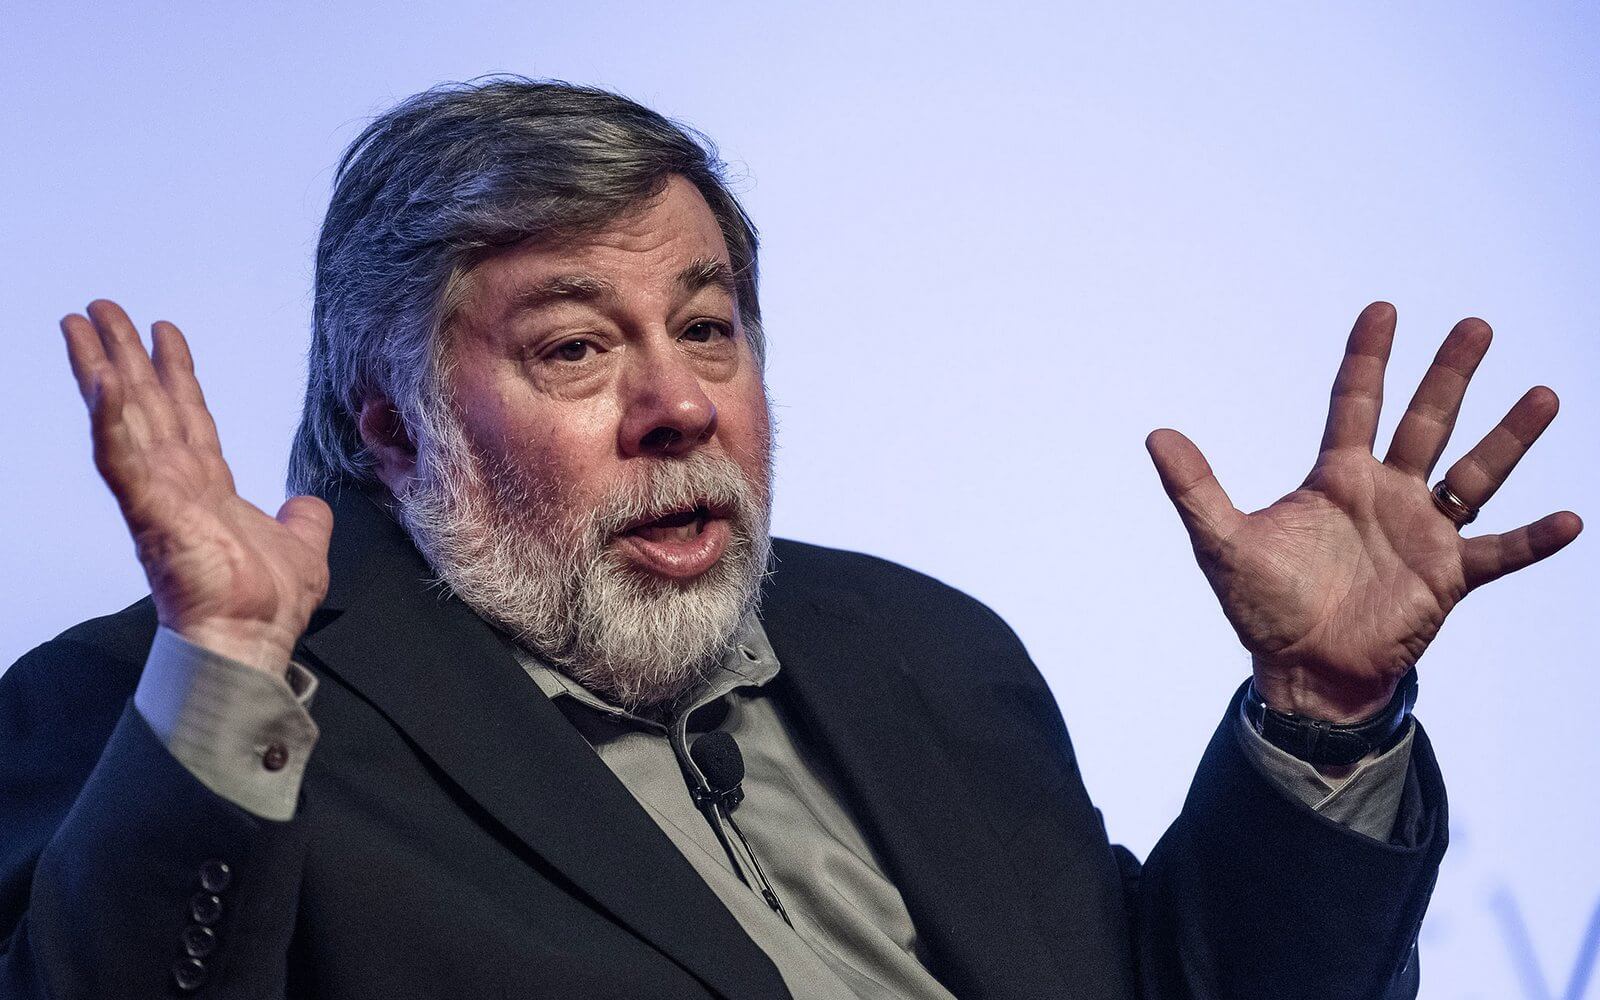 "I really don't see the difference": Steve Wozniak criticized the new iPhone 13